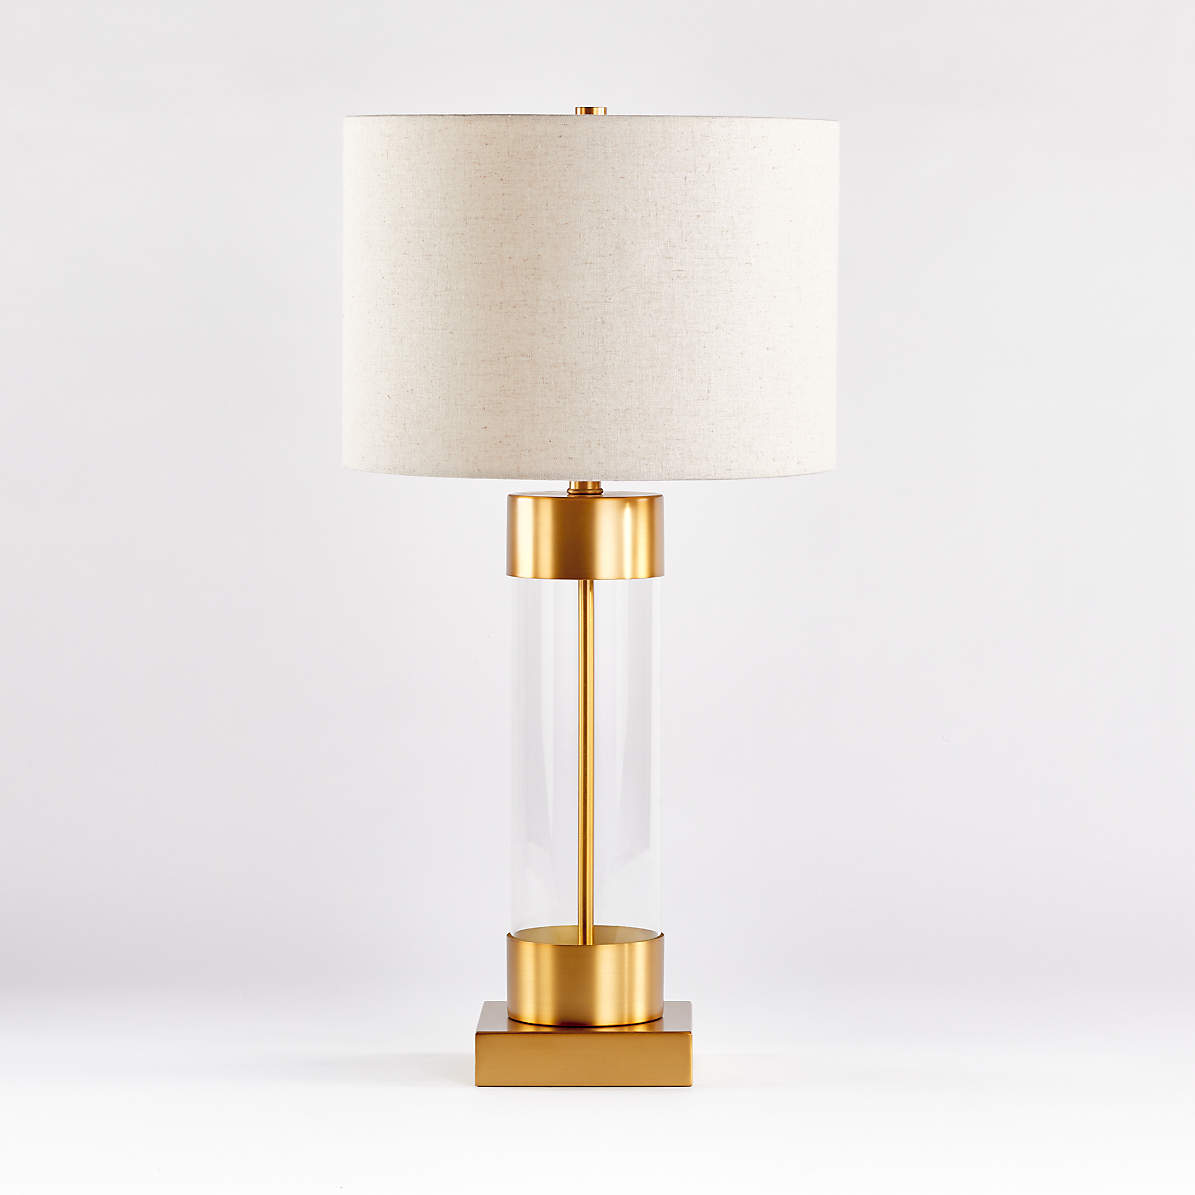 Avenue Brass Table Lamp With Usb Port, Wrought Iron Bedside Table Lamps With Usb Ports